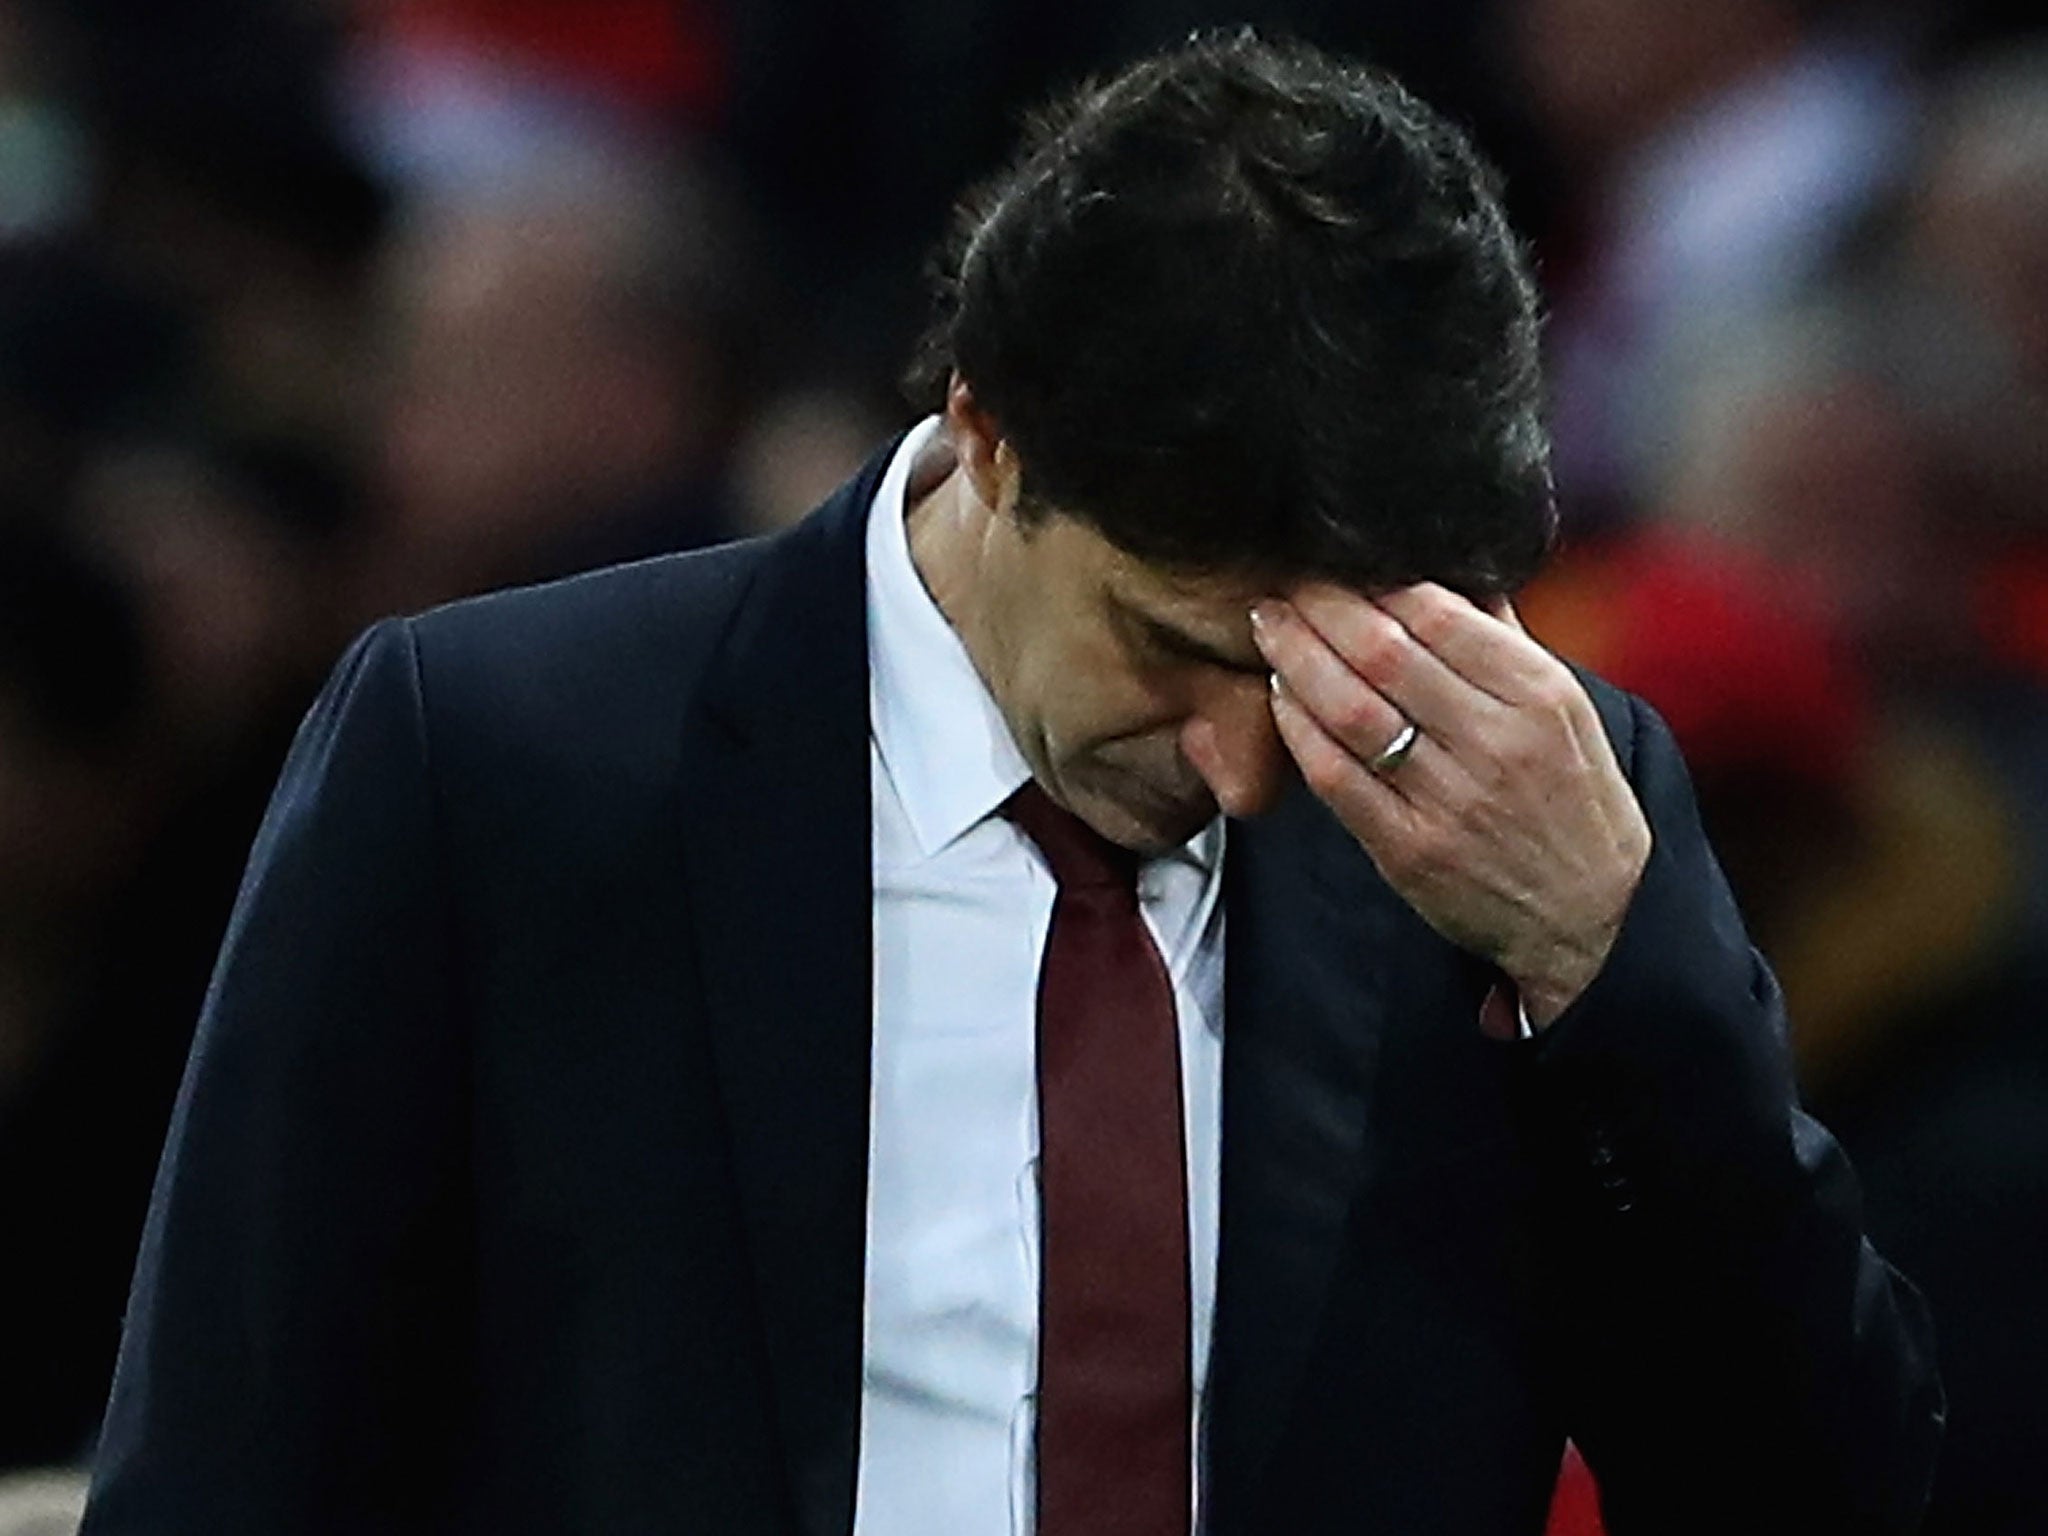 Karanka found things difficult since gaining promotion to the Premier League